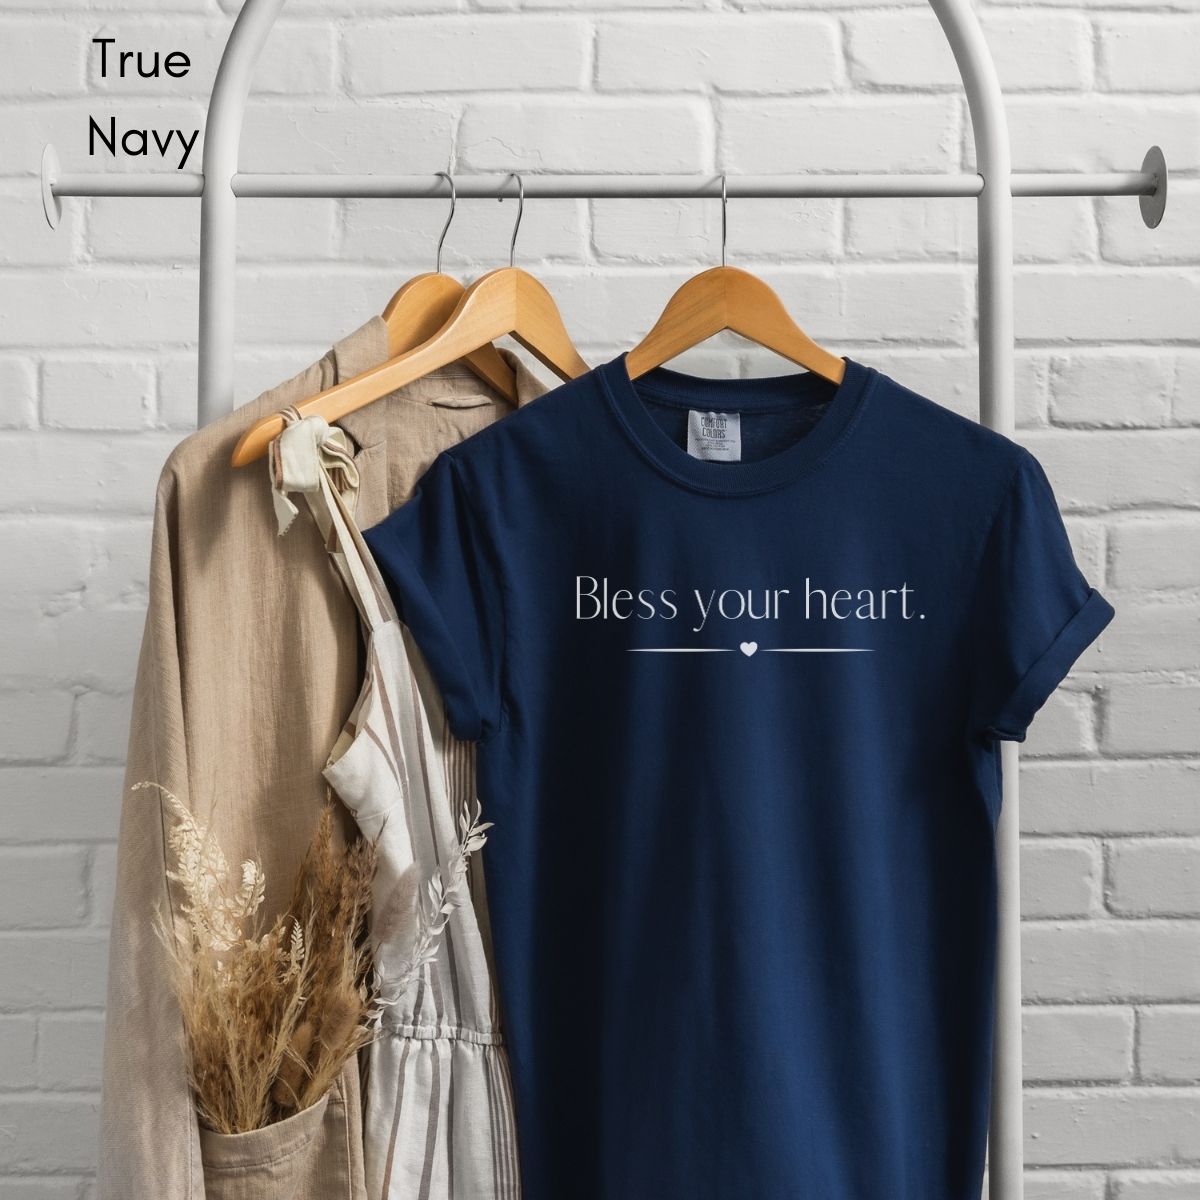 Bless Your Heart | Unisex Garment-Dyed T-shirt | Southern Sayings Tshirt | Sarcastic Tee | Funny T-shirt